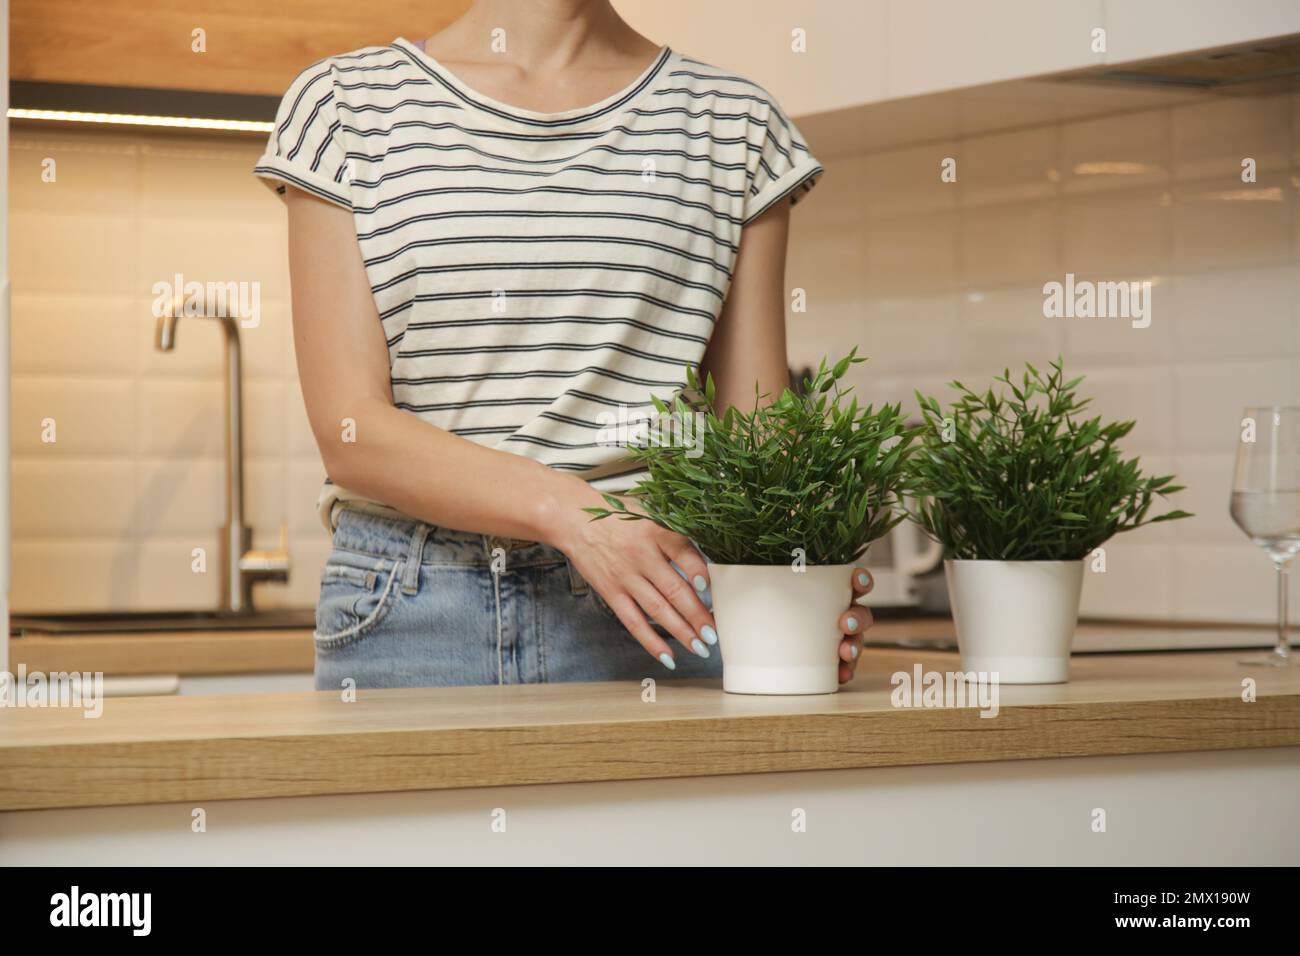 Woman arranging pots with herbs in her kitchen Stock Photo